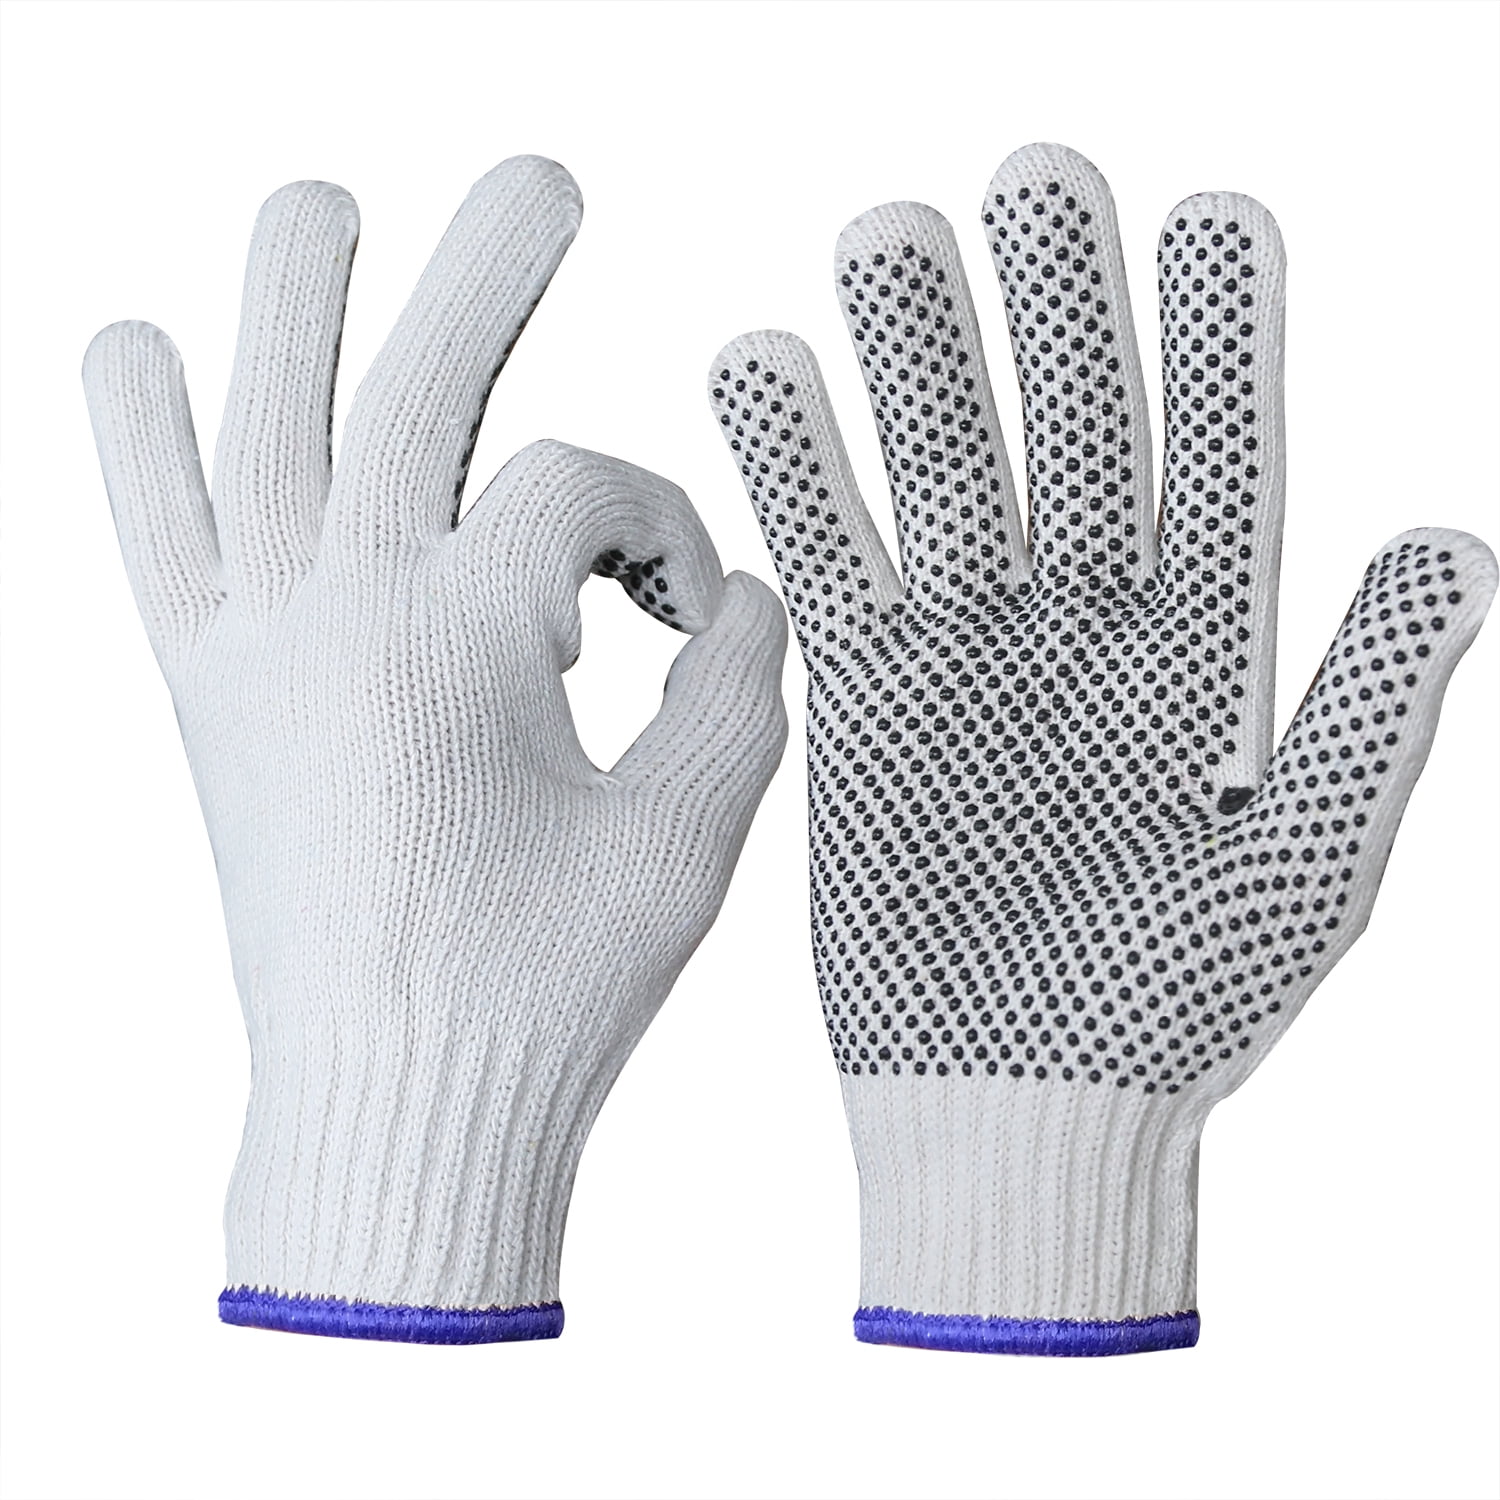 TOUCH SCREEN SAFETY WORK GLOVES STRONG GRIP KNITTED DOT MULTIPURPOSE BREATHABLE 